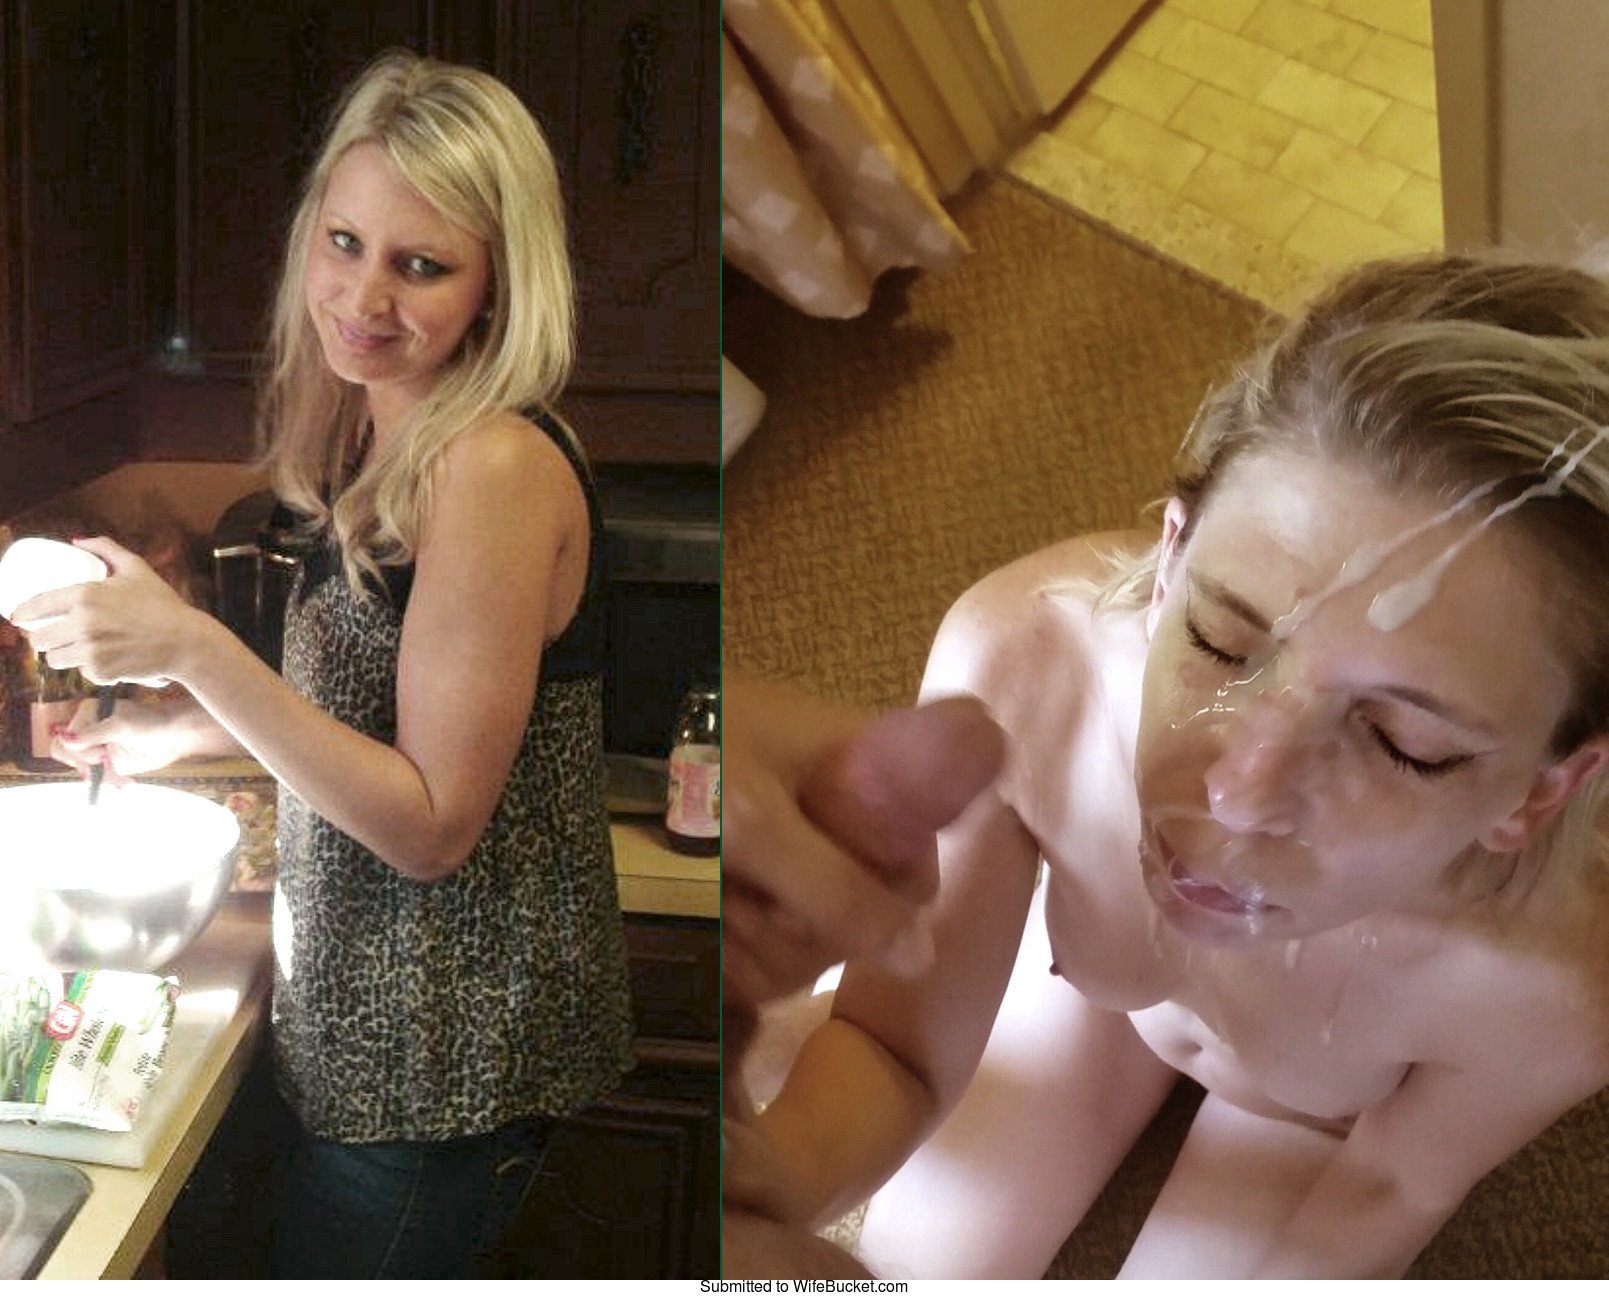 1609px x 1297px - 6 amateur pics before and after the facial cumshot! â€“ WifeBucket | Offical  MILF Blog